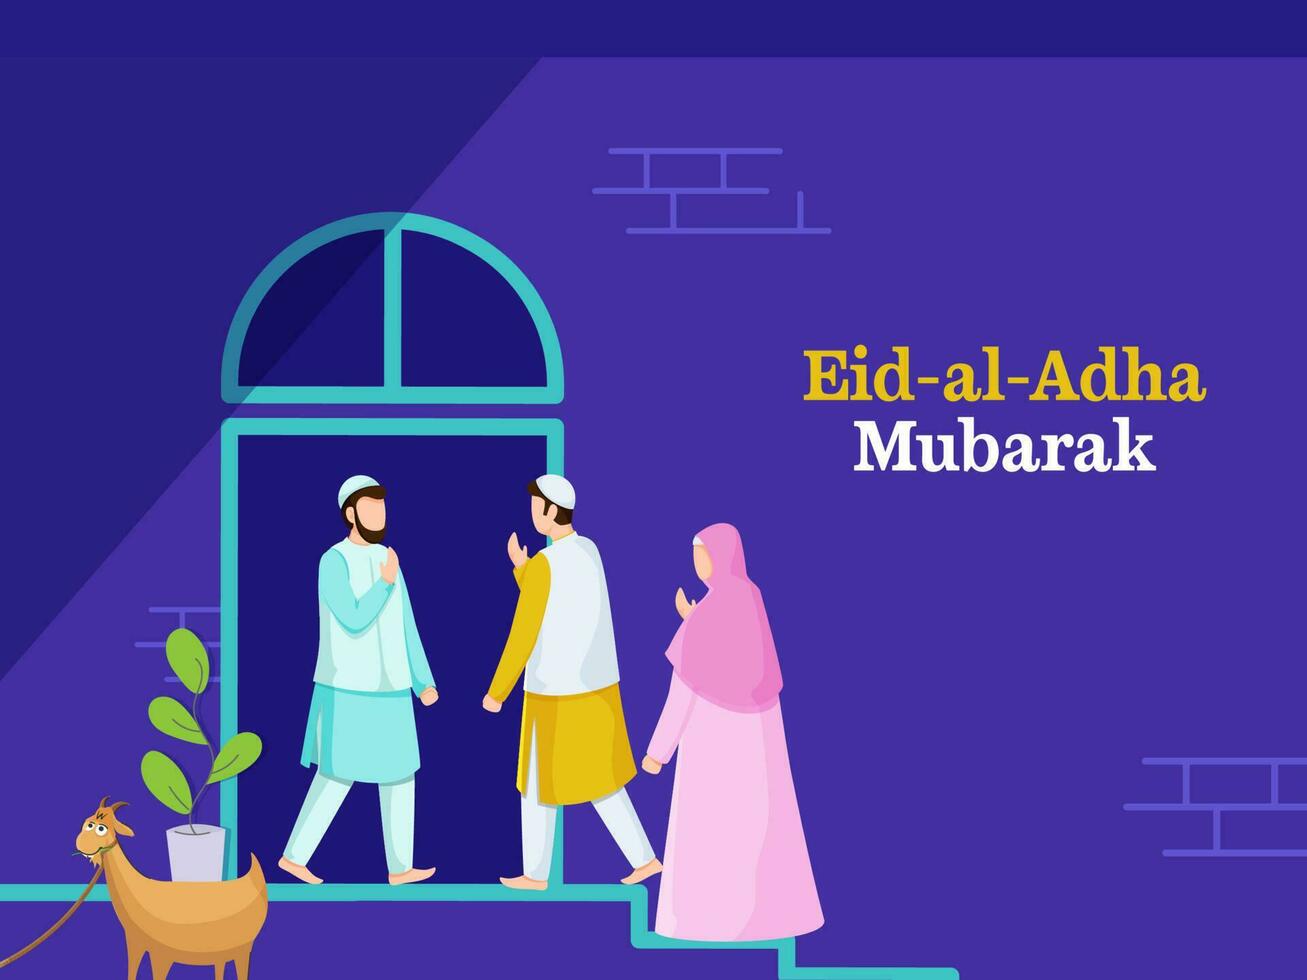 Eid Al Adha Mubarak Concept With Cartoon Islamic People Celebrating Together And Goat Animal On Violet Background. vector